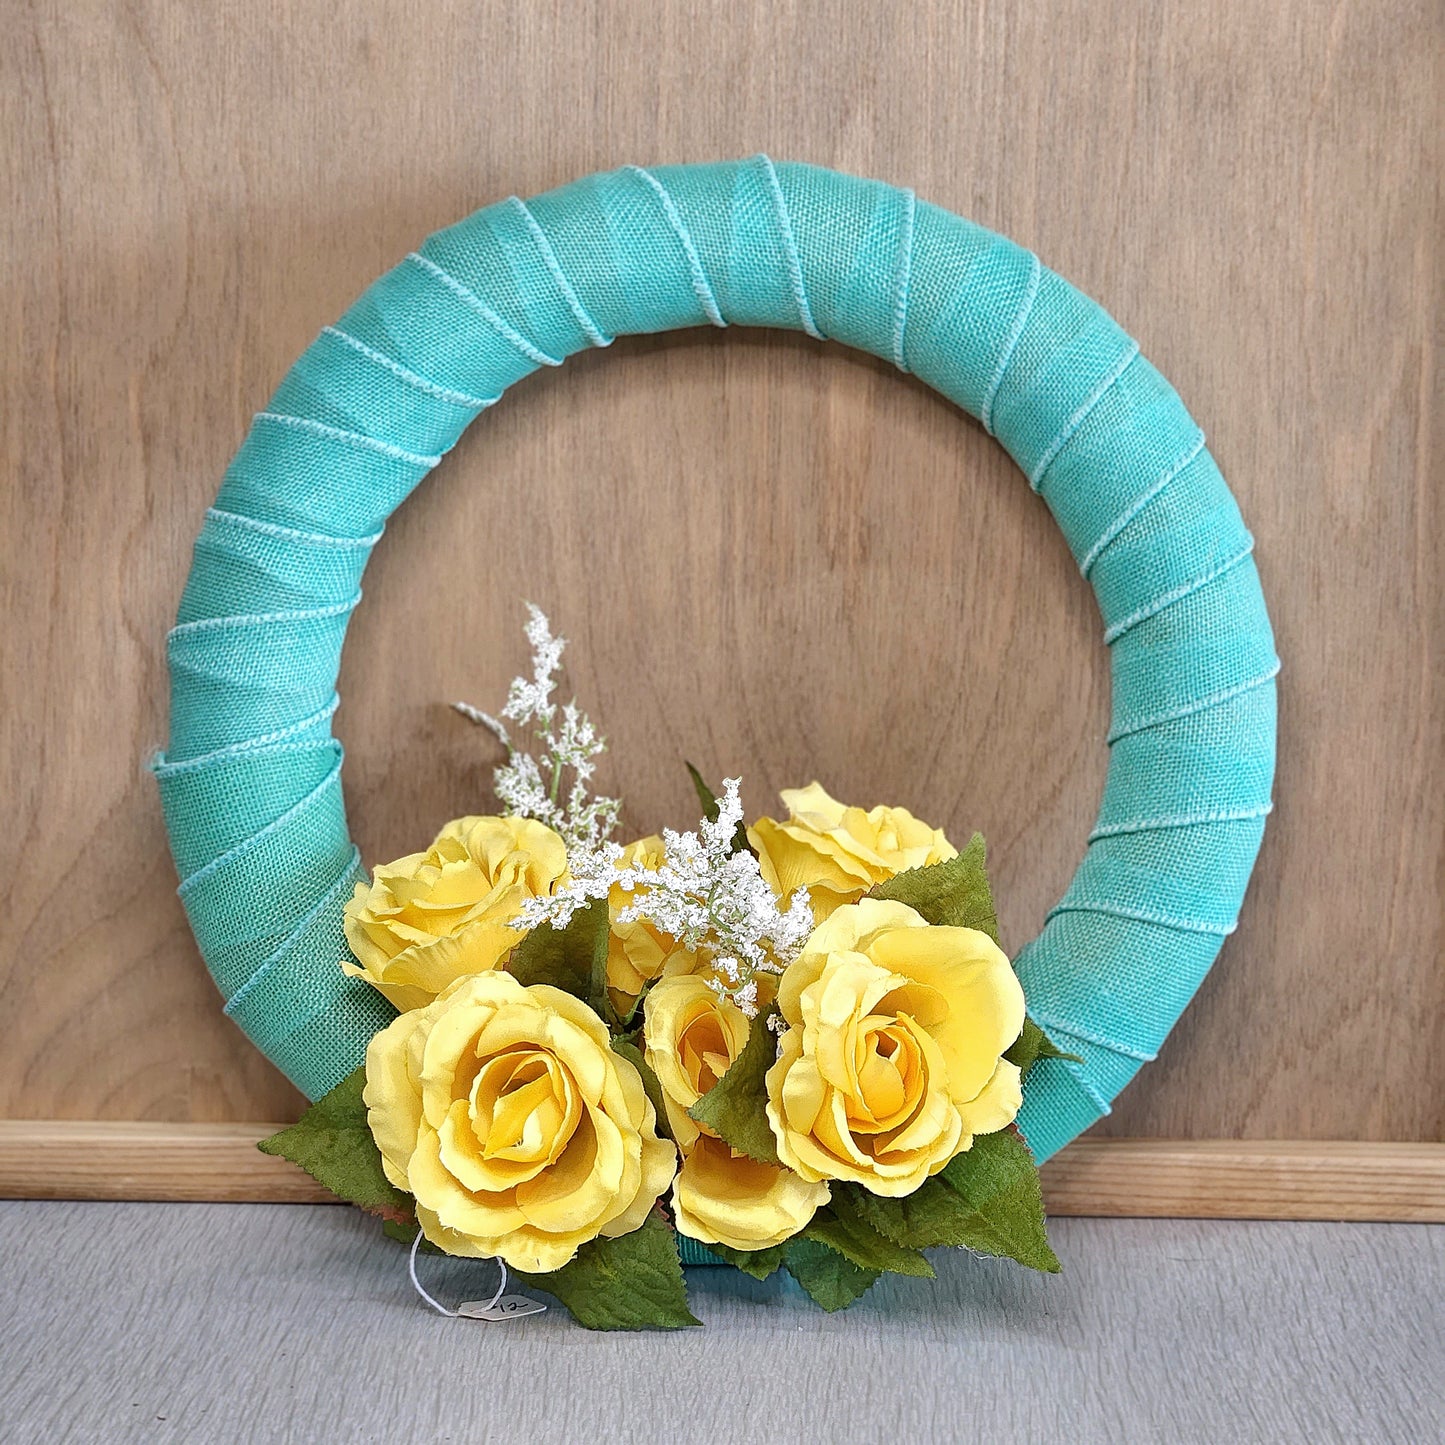 Hand Wrapped Wreaths - Variety